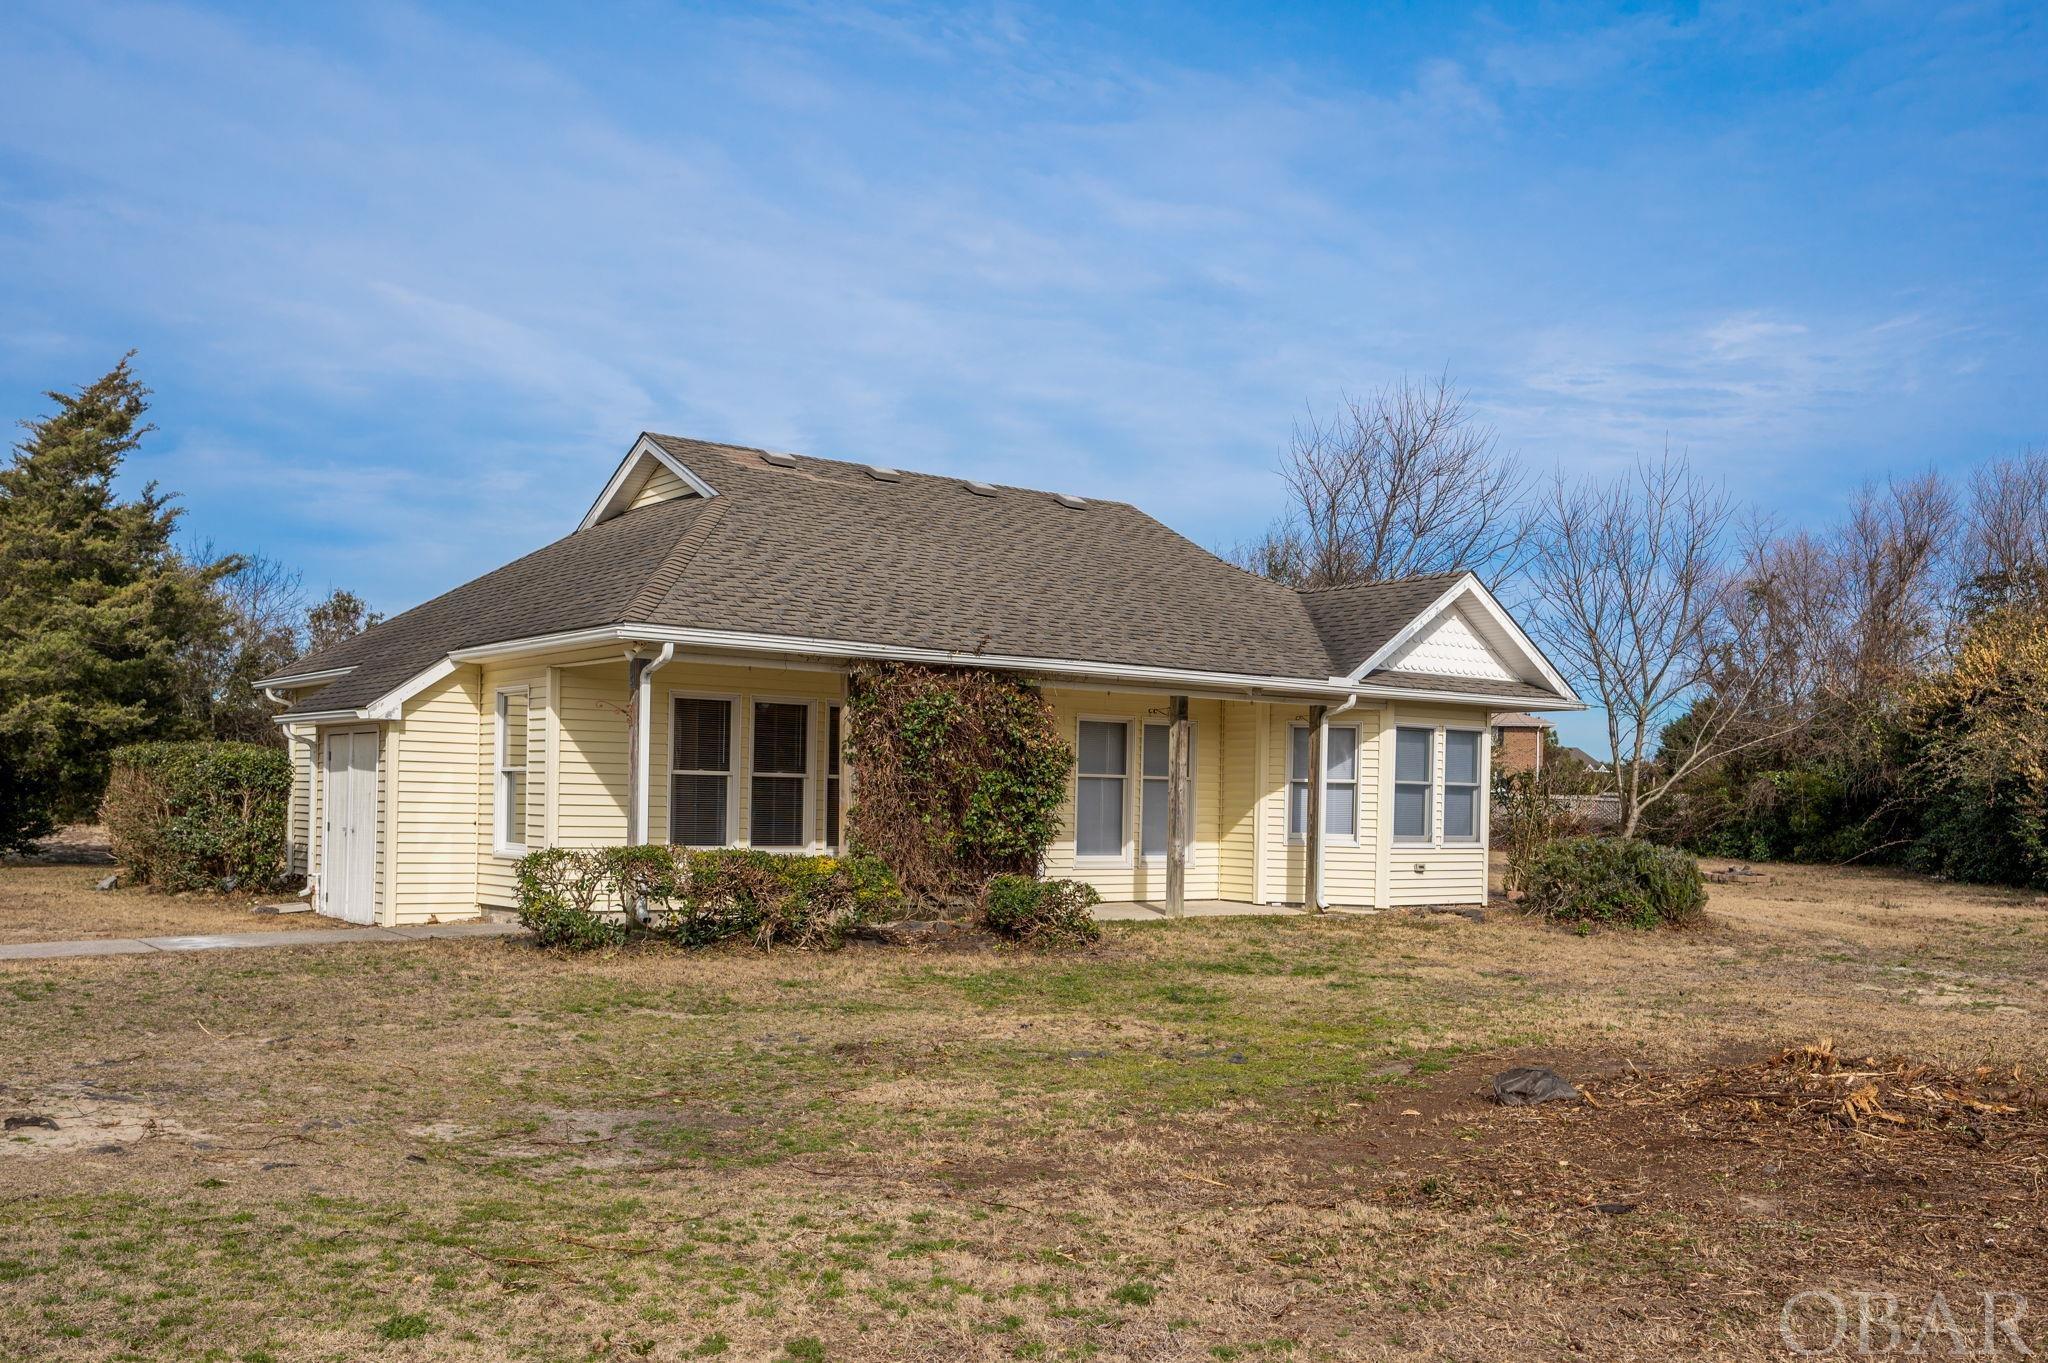 3909 Shelby Avenue, Kitty Hawk, NC 27949, 3 Bedrooms Bedrooms, ,2 BathroomsBathrooms,Residential,For sale,Shelby Avenue,124925